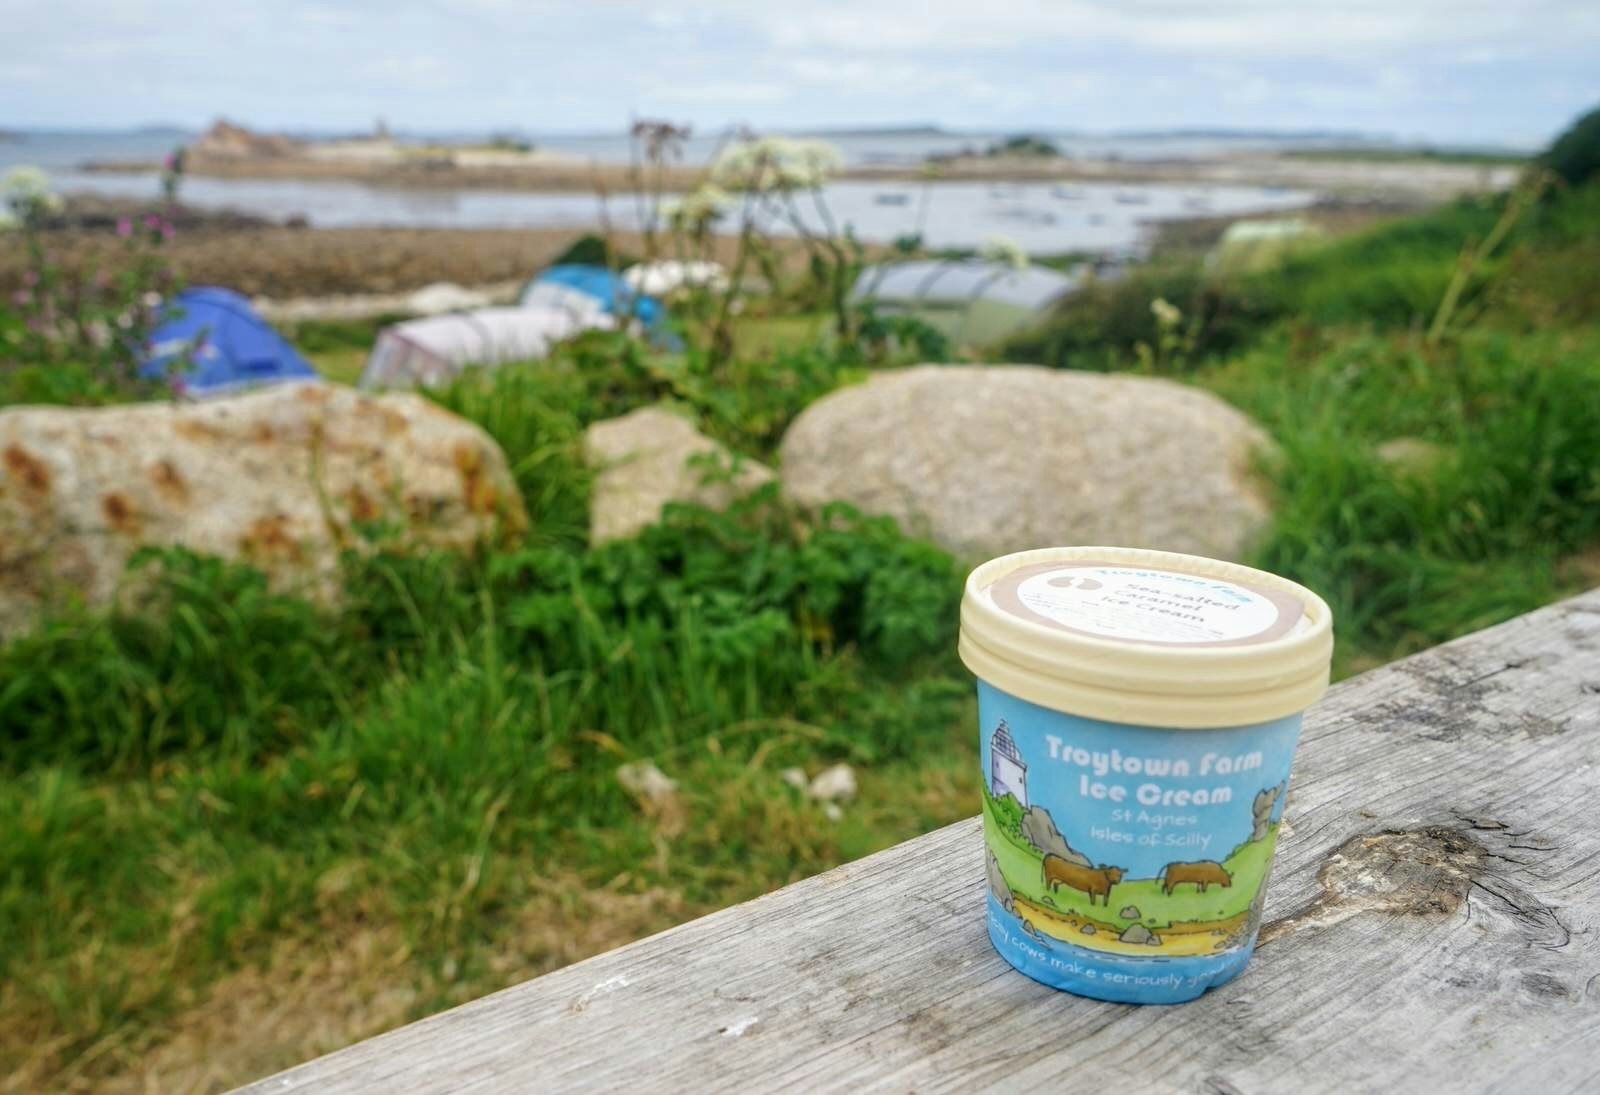 A tub of Troytown Farm ice cream on a picnic bench with the farm's campsite in the background, St Agnes, Isles of Scilly, England, UK © James Kay / Lonely Planet